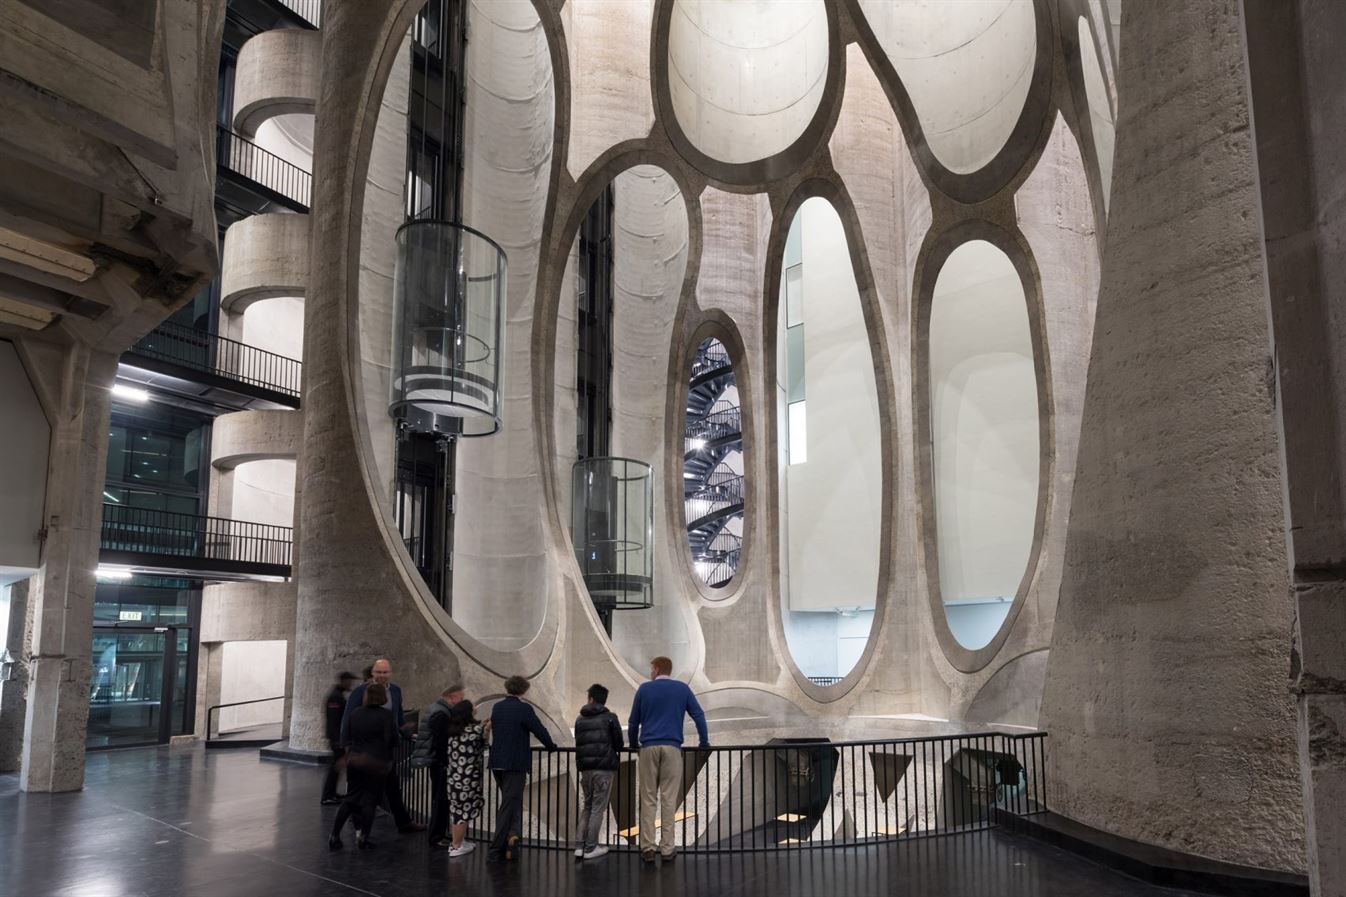 heatherwick-architecture-cultural-galleries-v-and-a-south-africa-interior_dezeen_2364_col_5-1704x1136